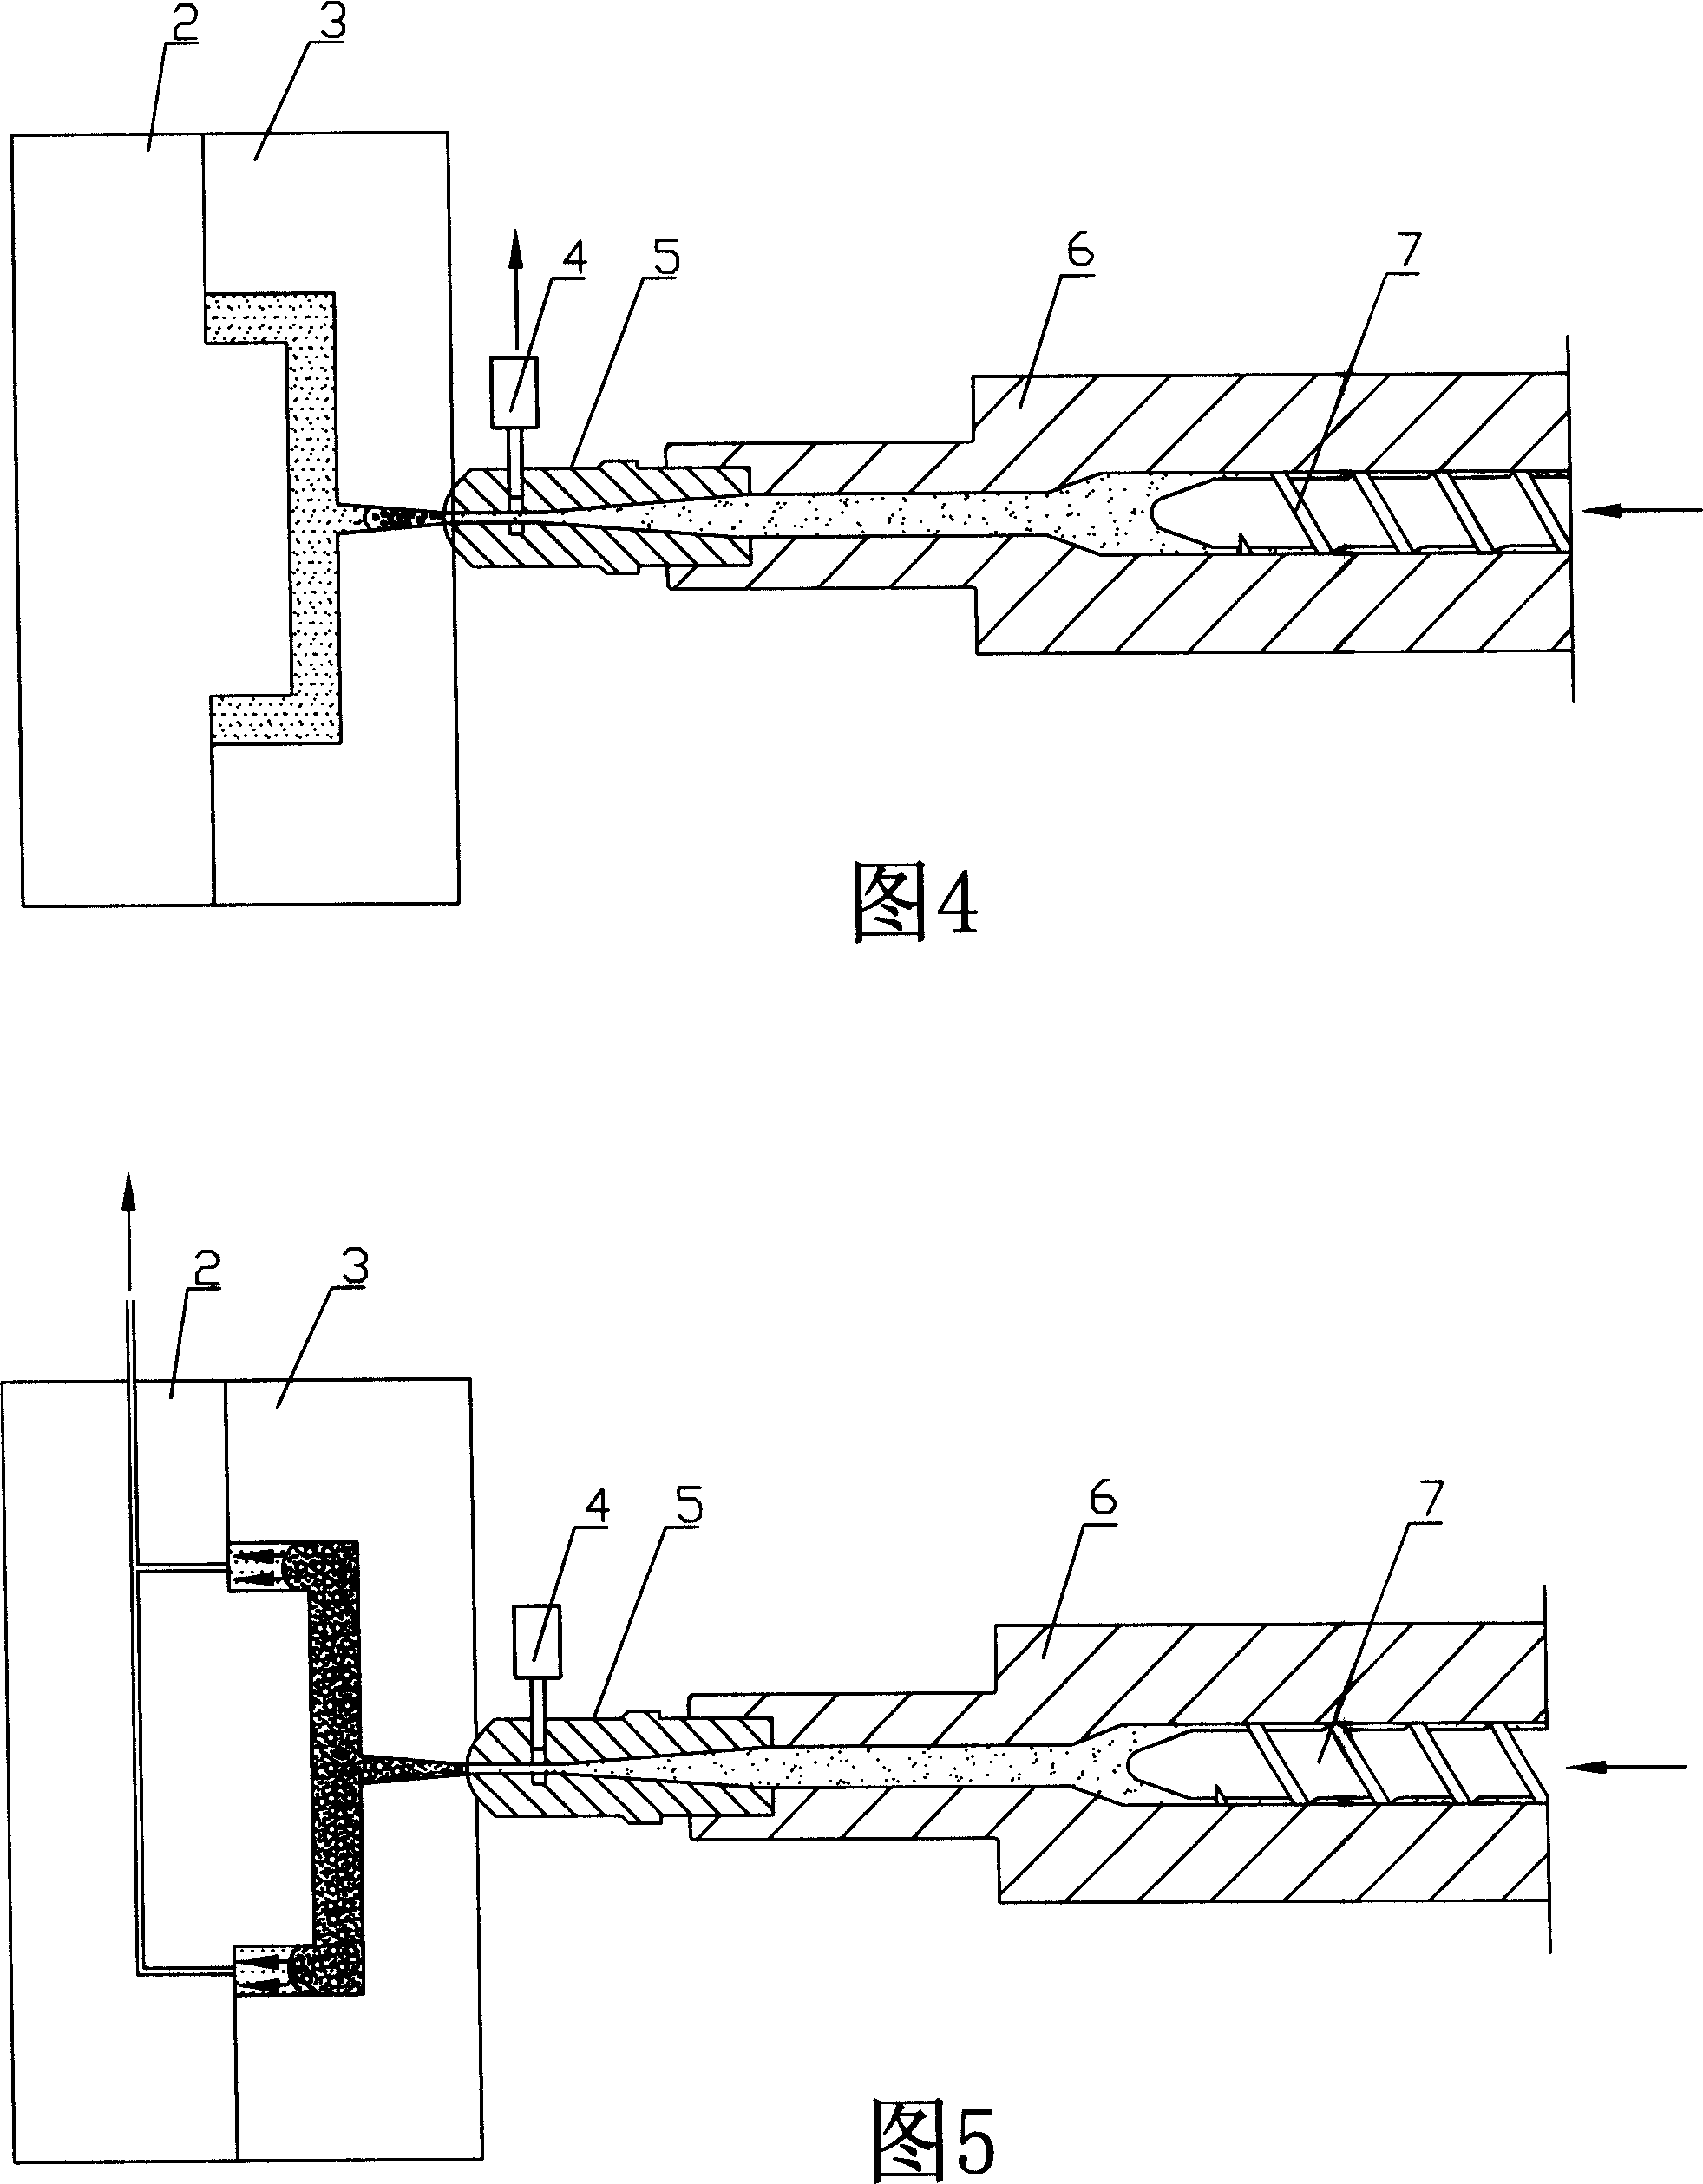 High speed injecting molding method by counter pressure method and chemical foaming method